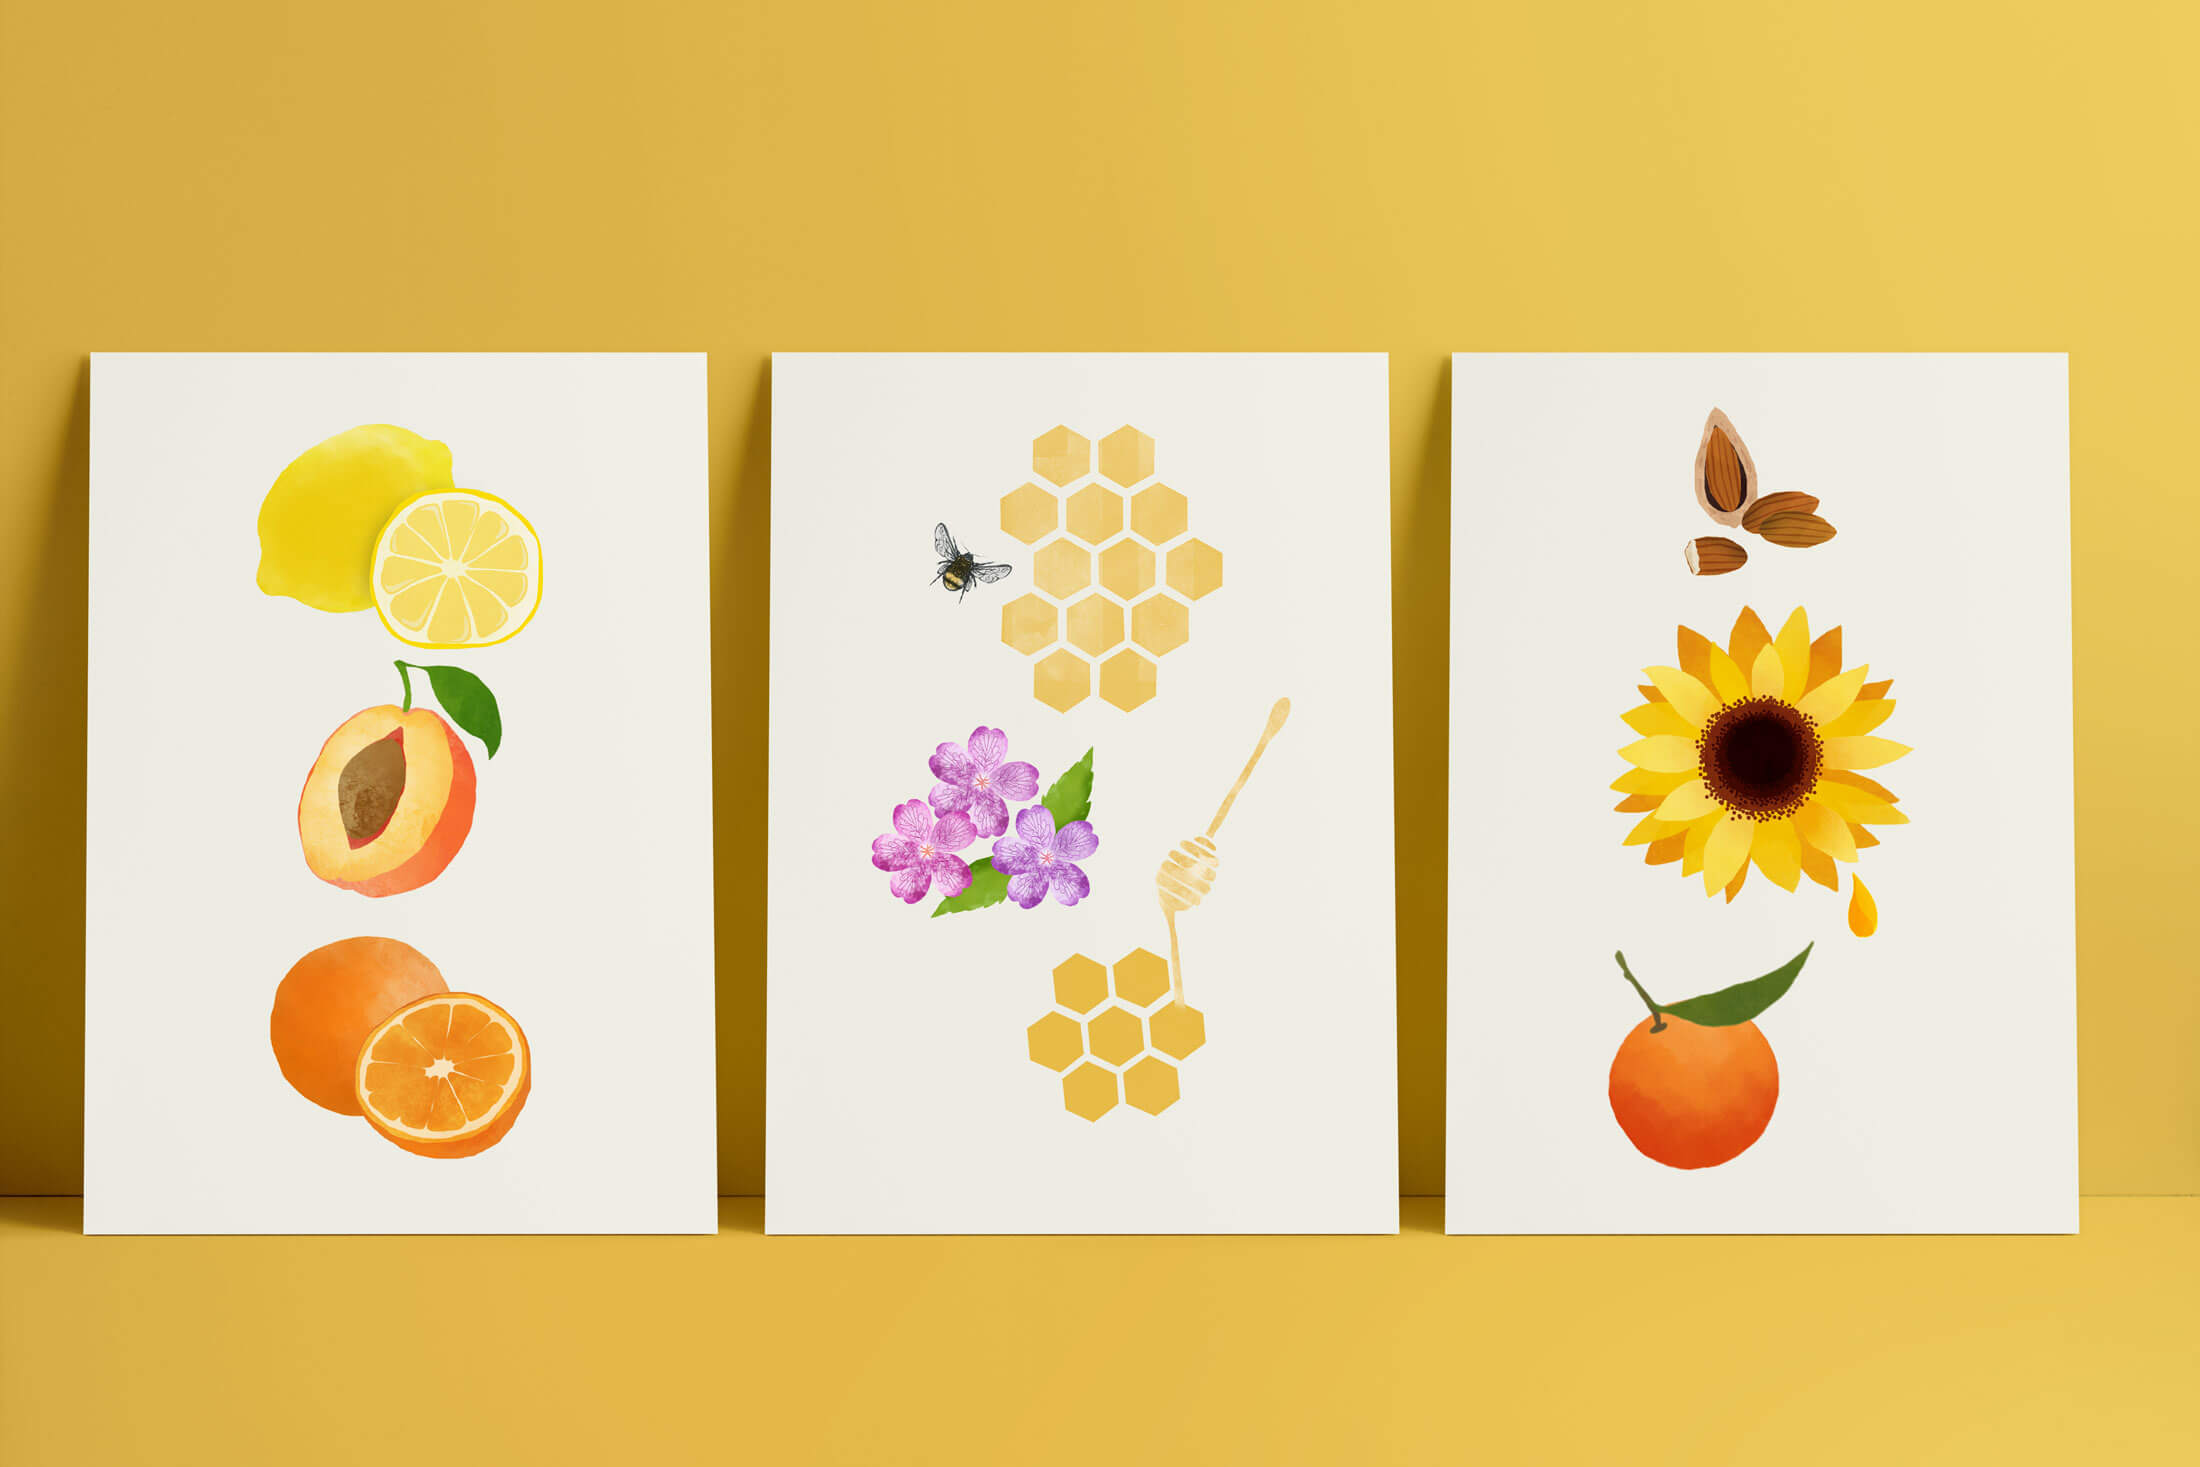 Three posters featuring illustrations of botanicals and ingredients